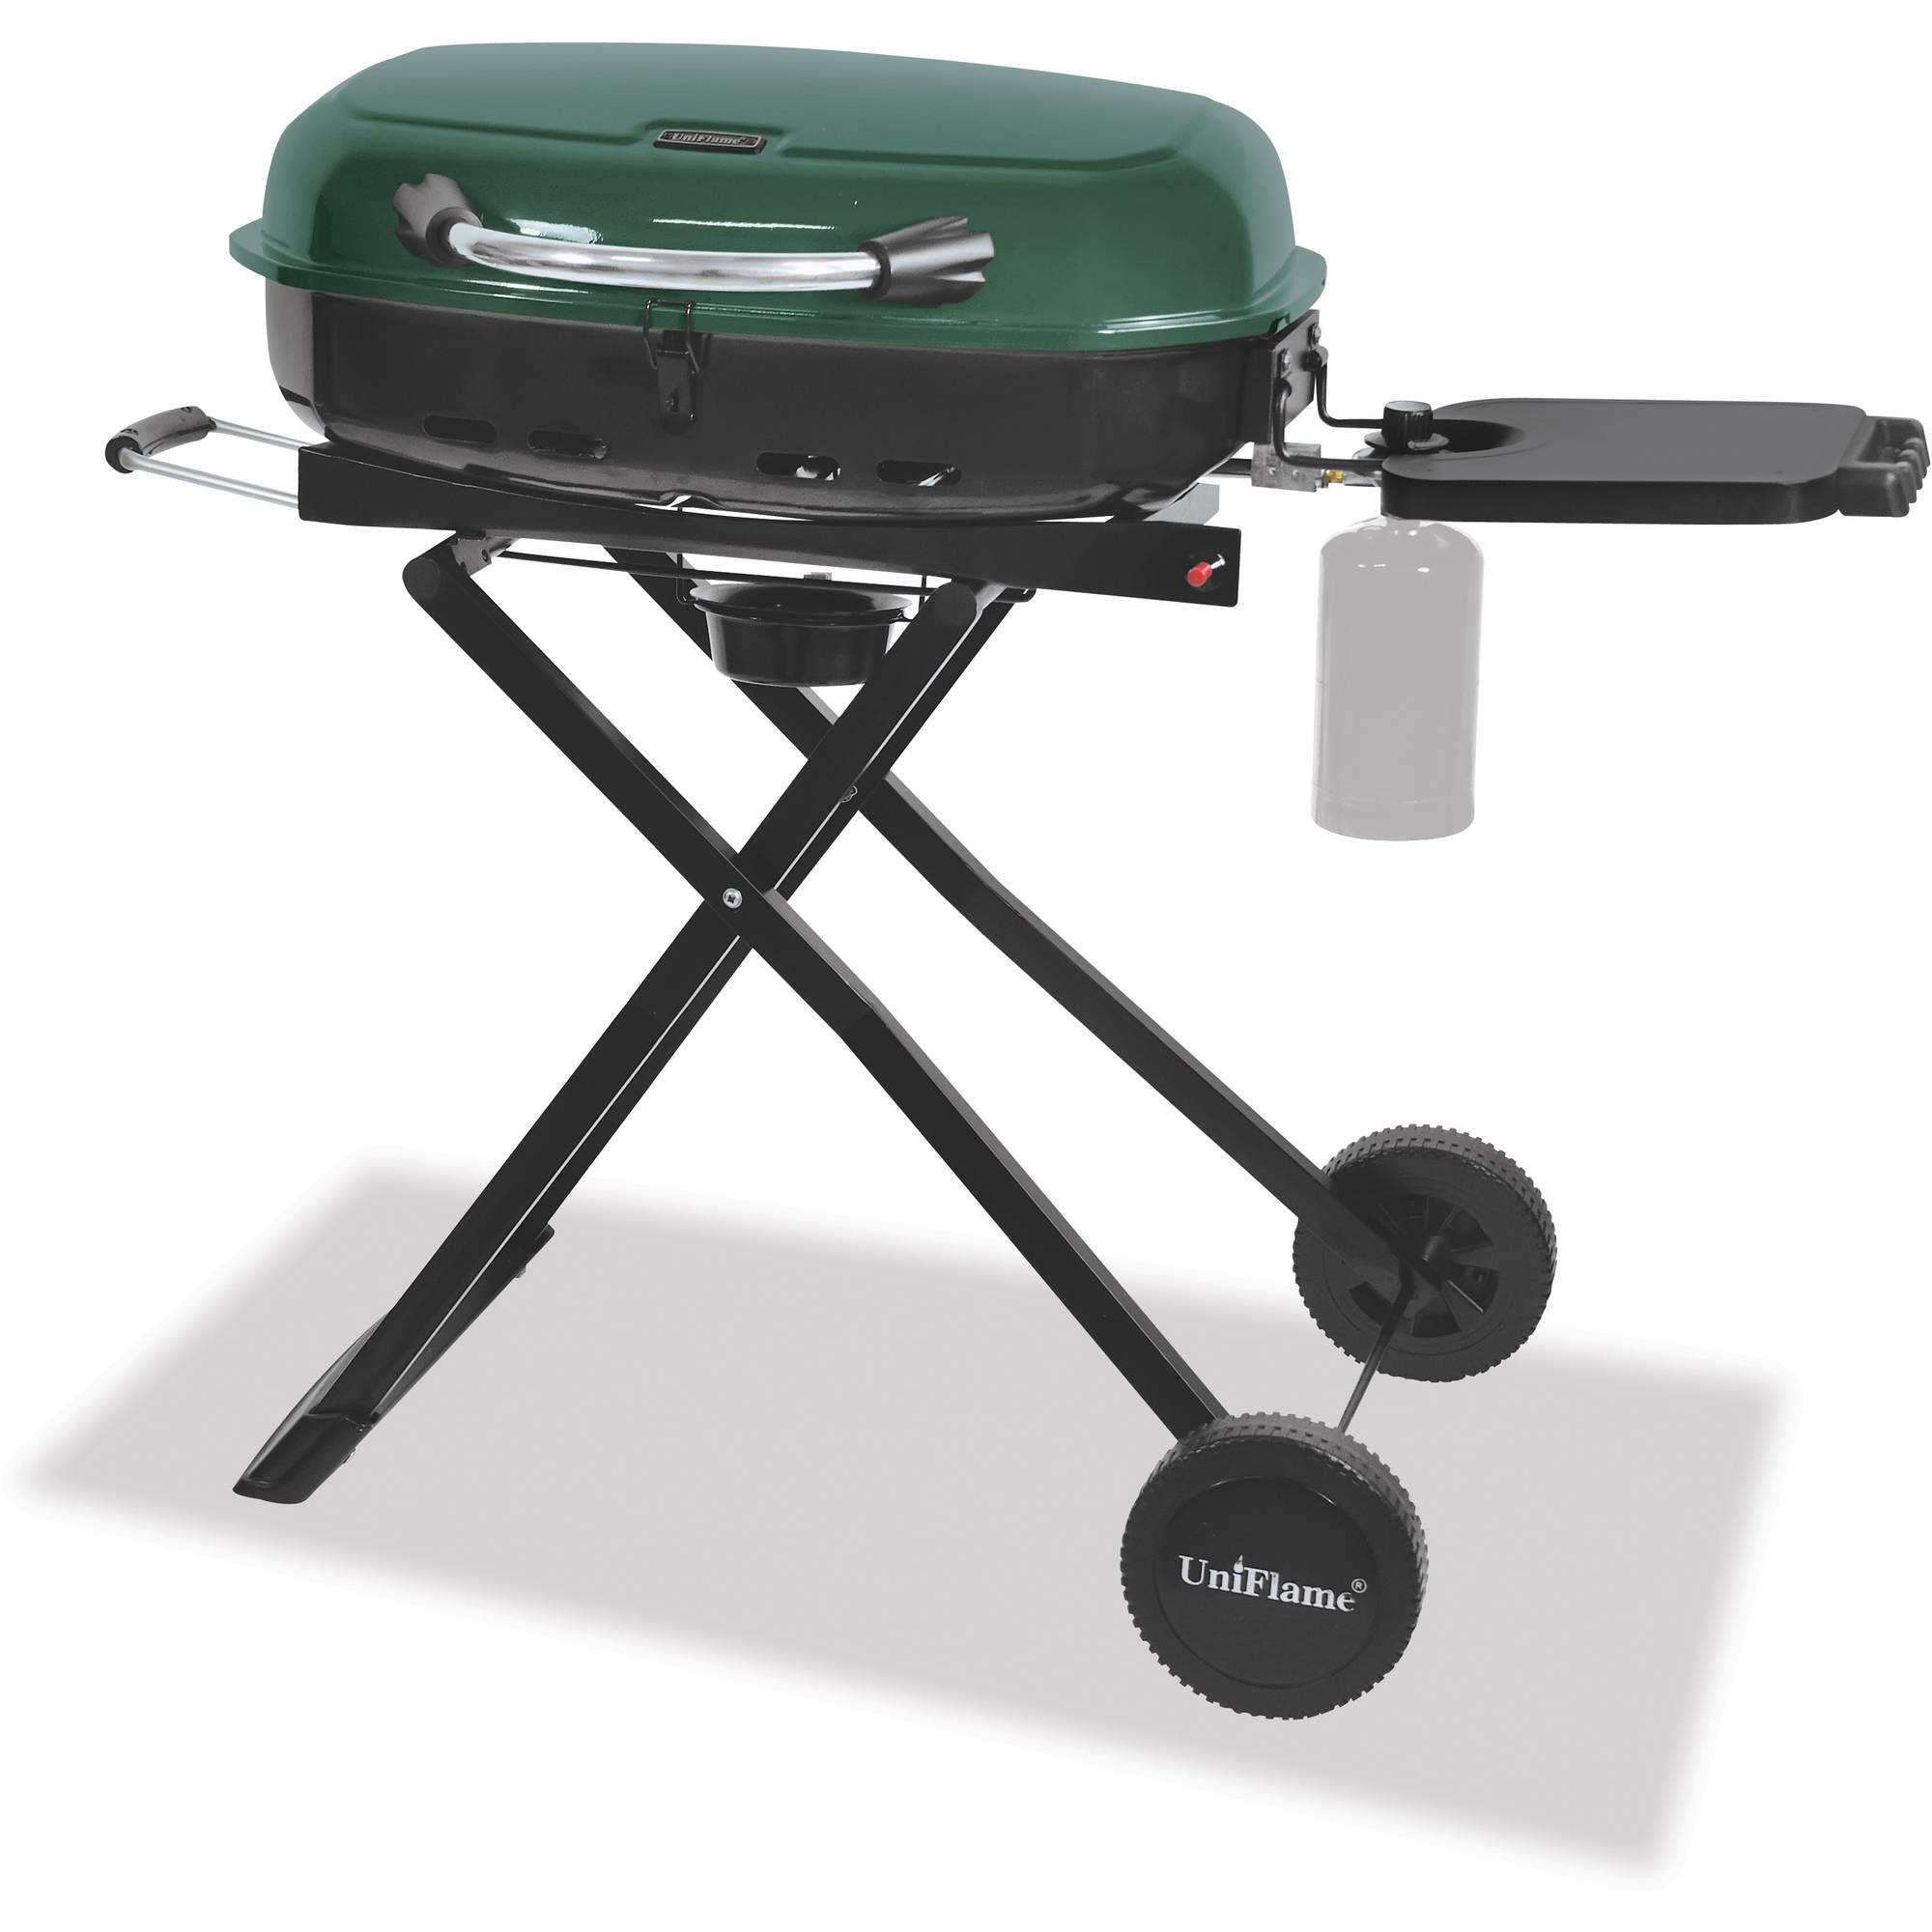 Foldable Gas Tailgate Grill - Green - image 1 of 4